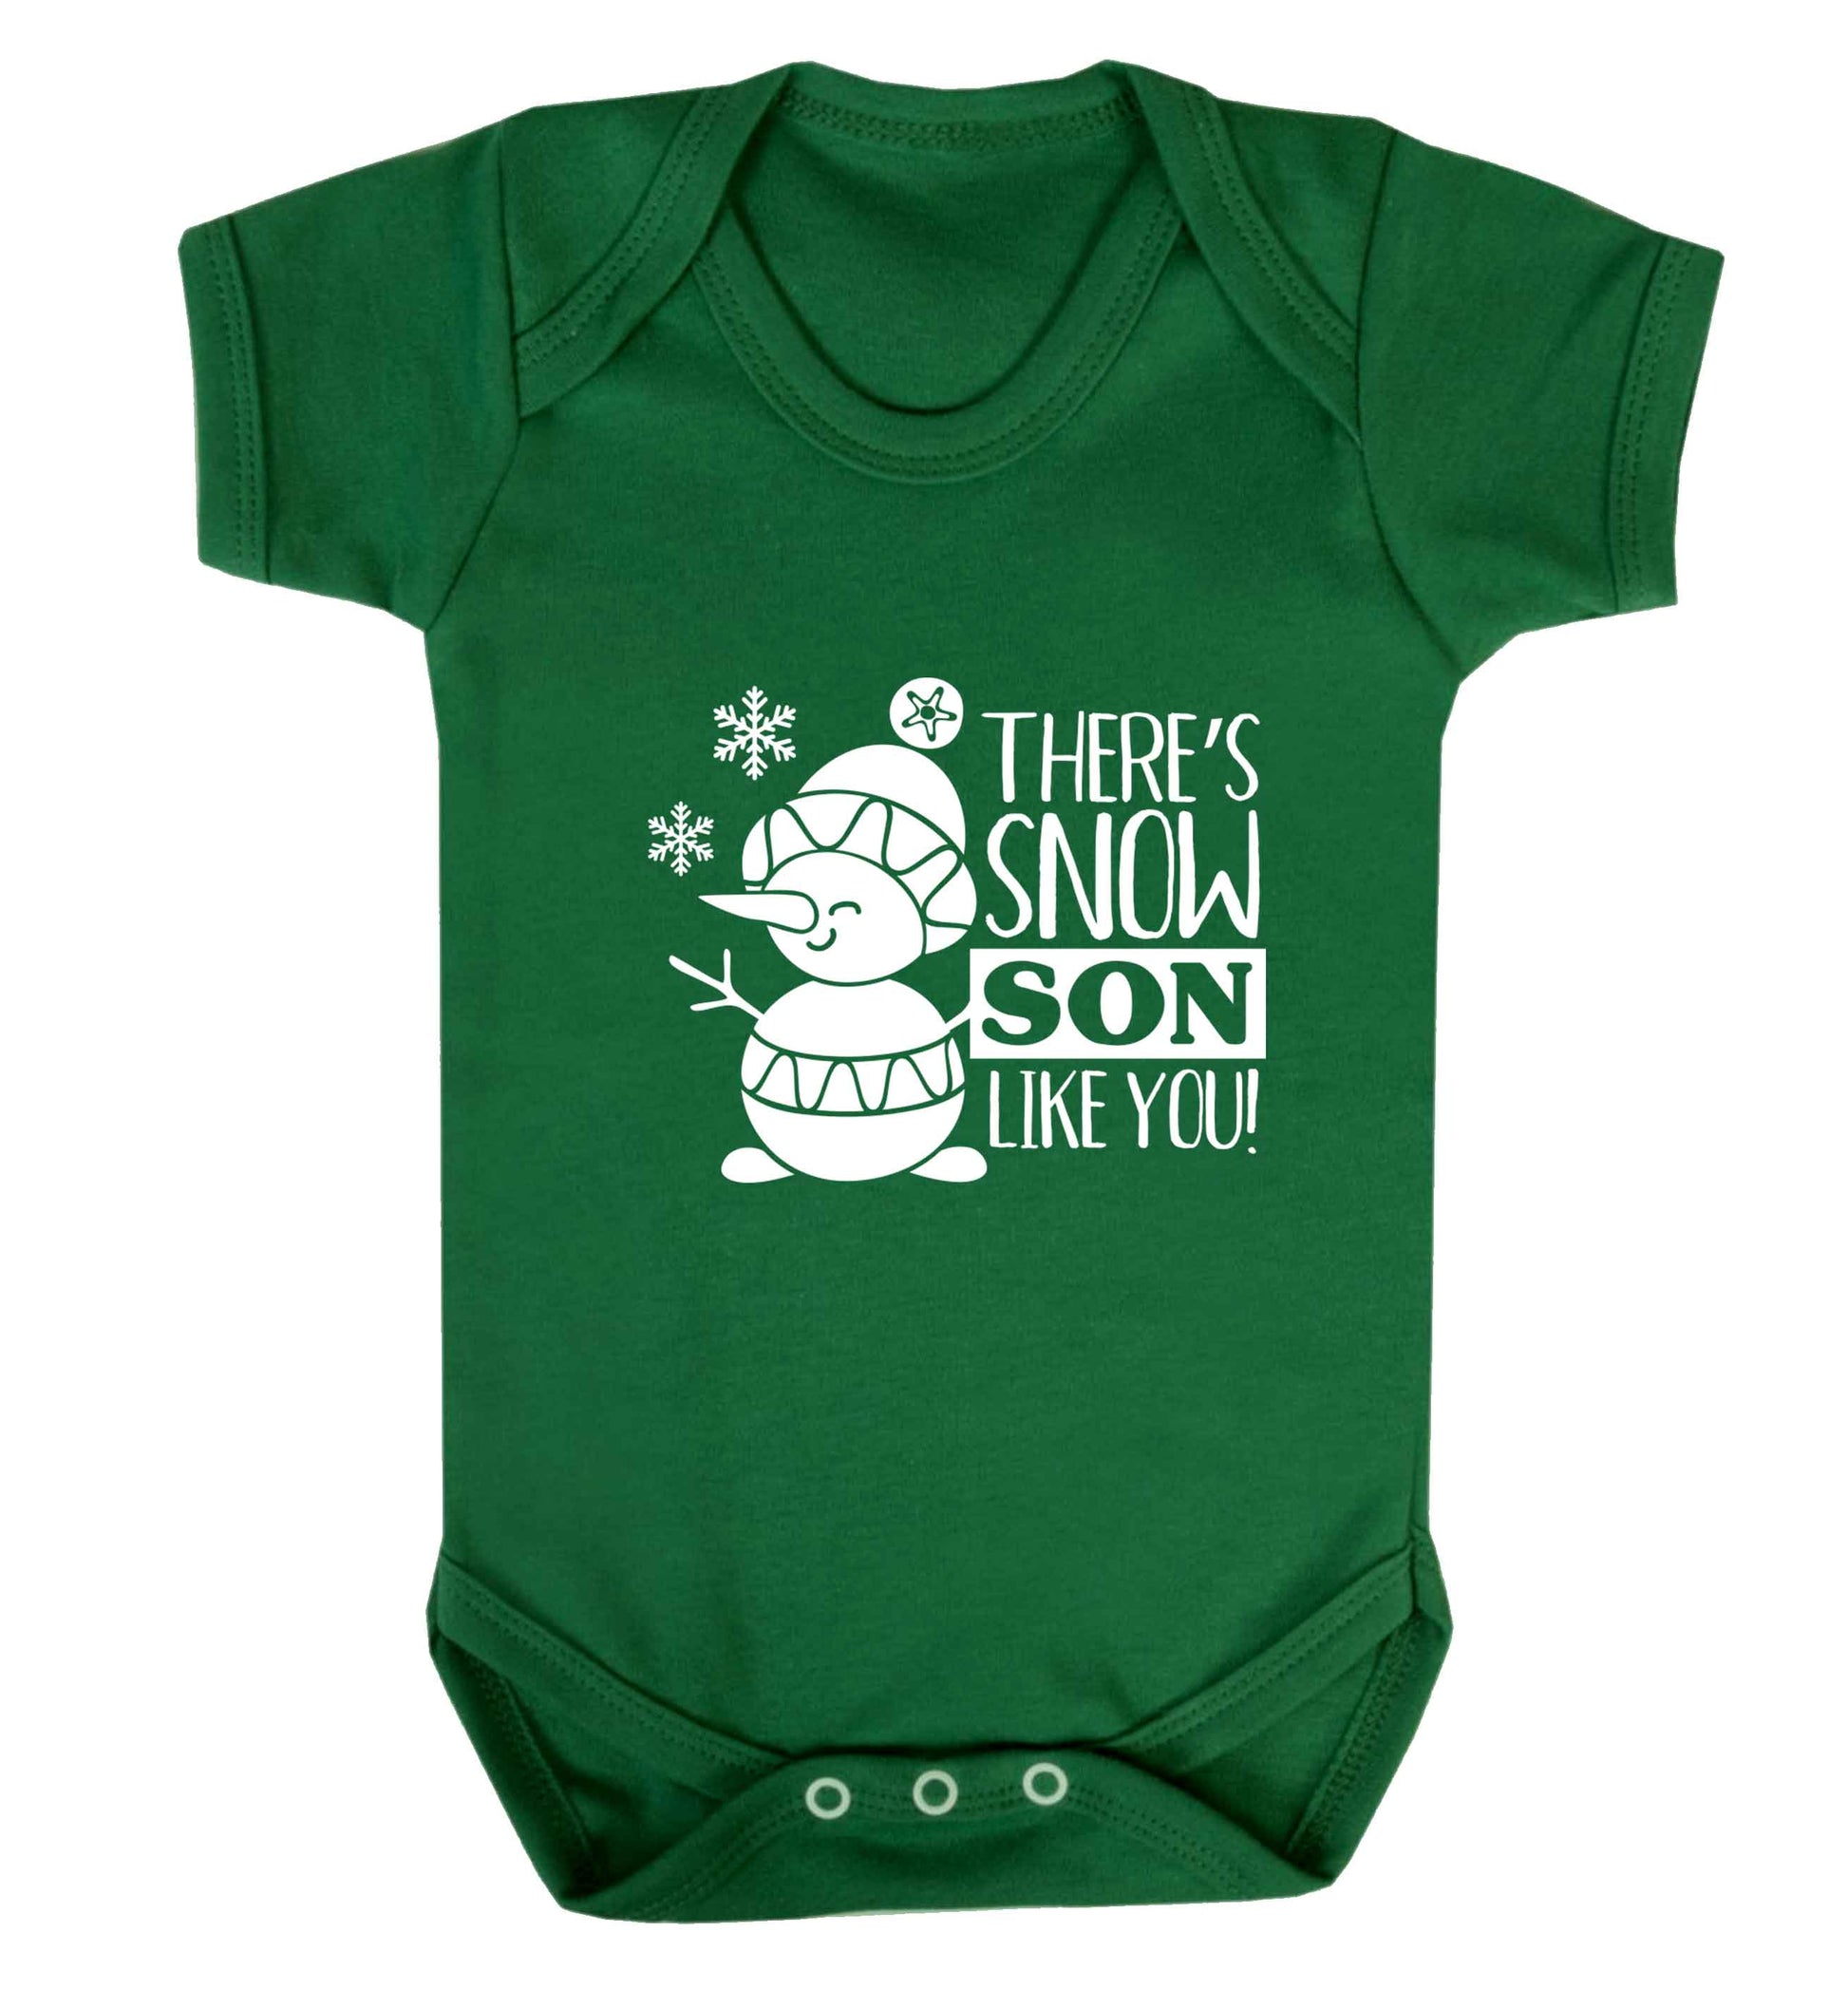 There's snow son like you baby vest green 18-24 months